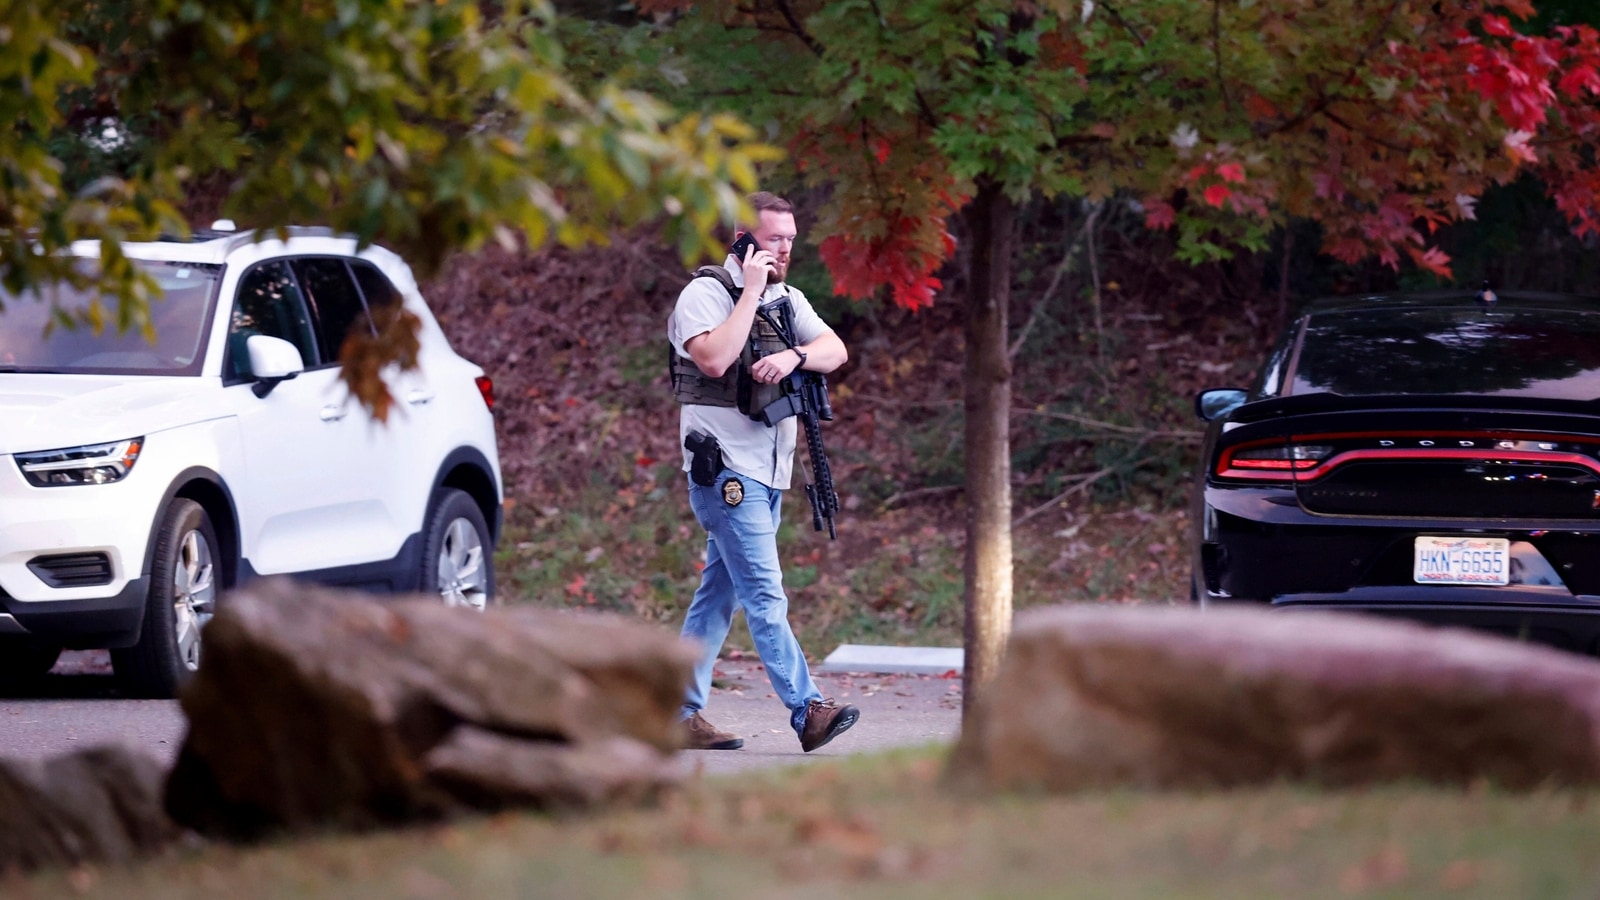 five-including-a-police-officer-killed-in-north-carolina-shooting-mayor